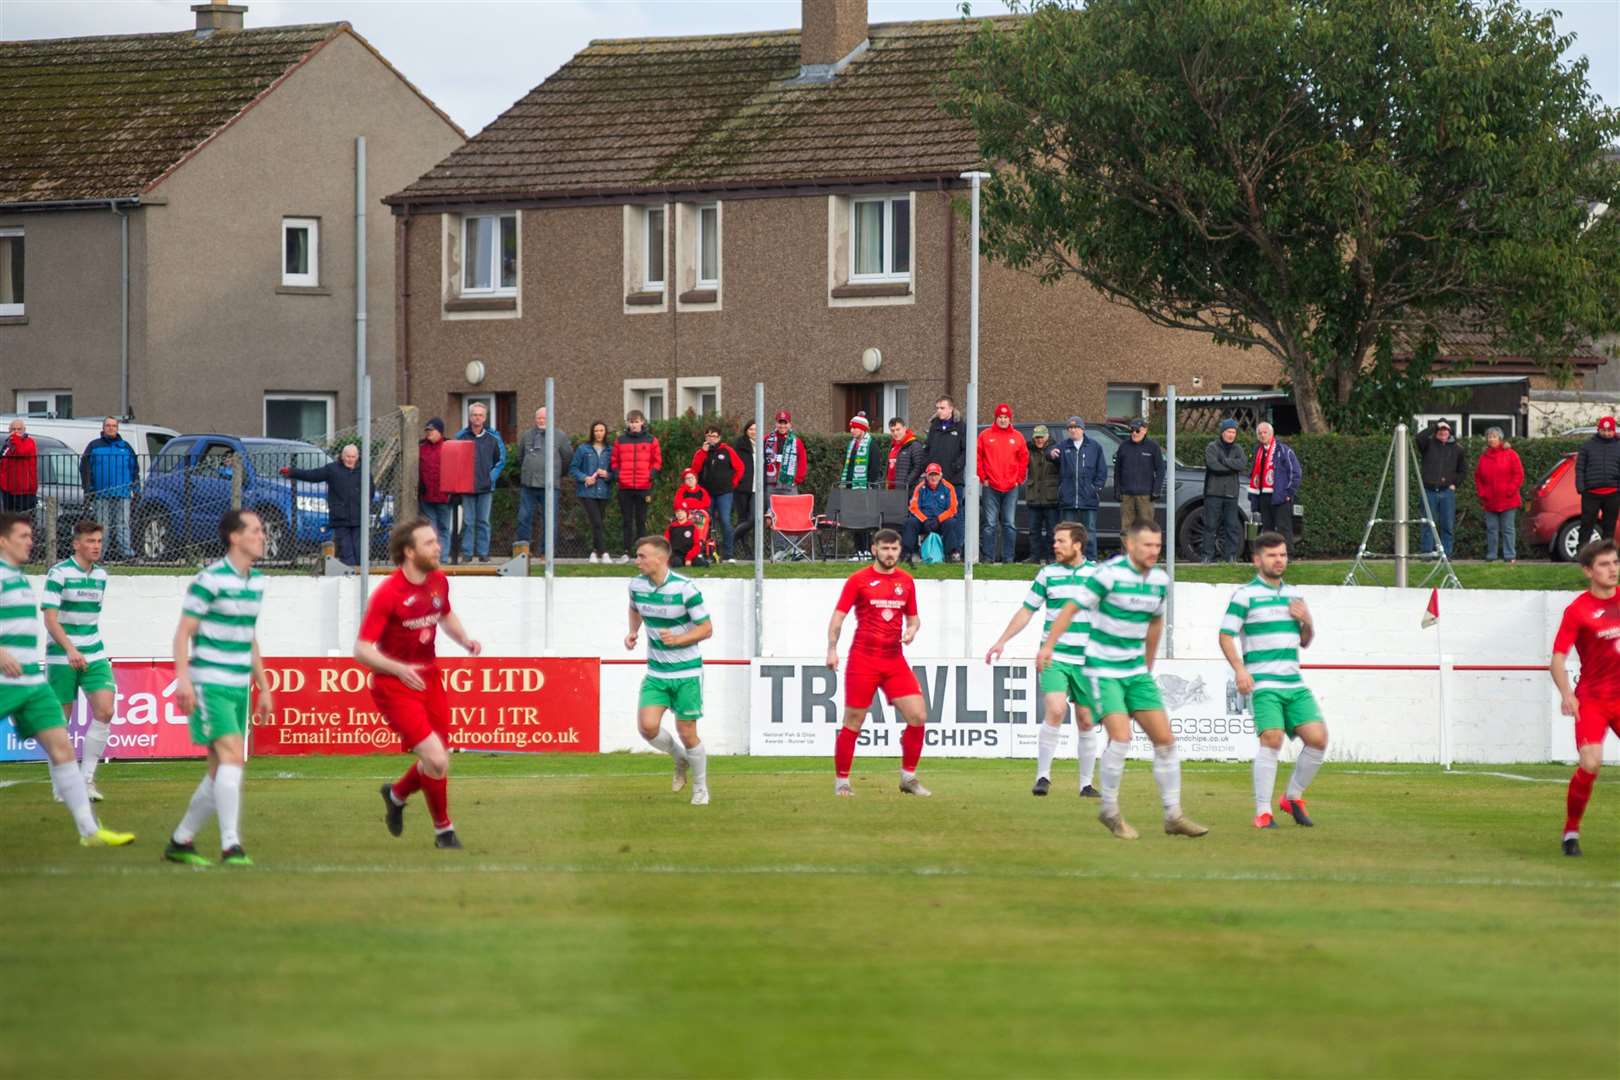 Brora Rangers will be able to allow fans into the ground as of Monday. Picture: Daniel Forsyth